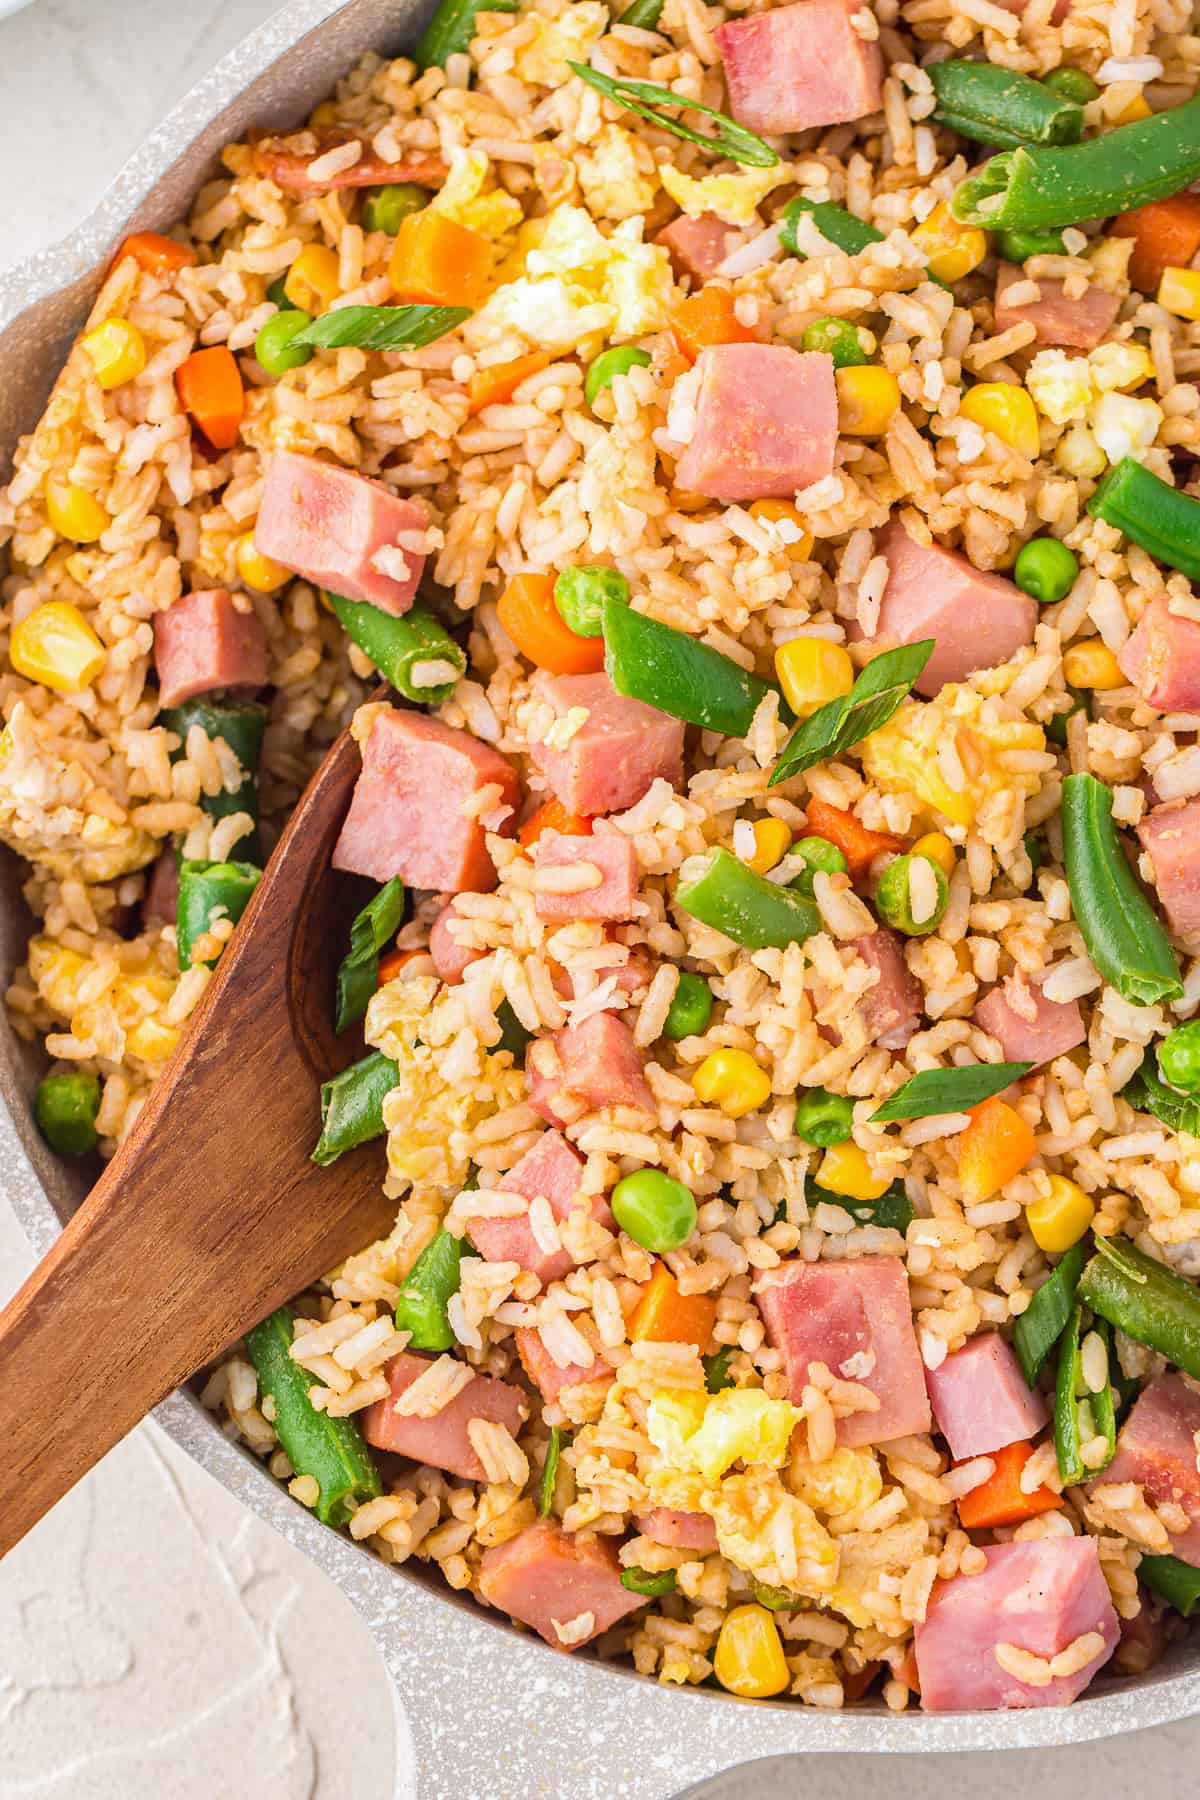 ham fried rice in a frying pan with a wooden spoon.